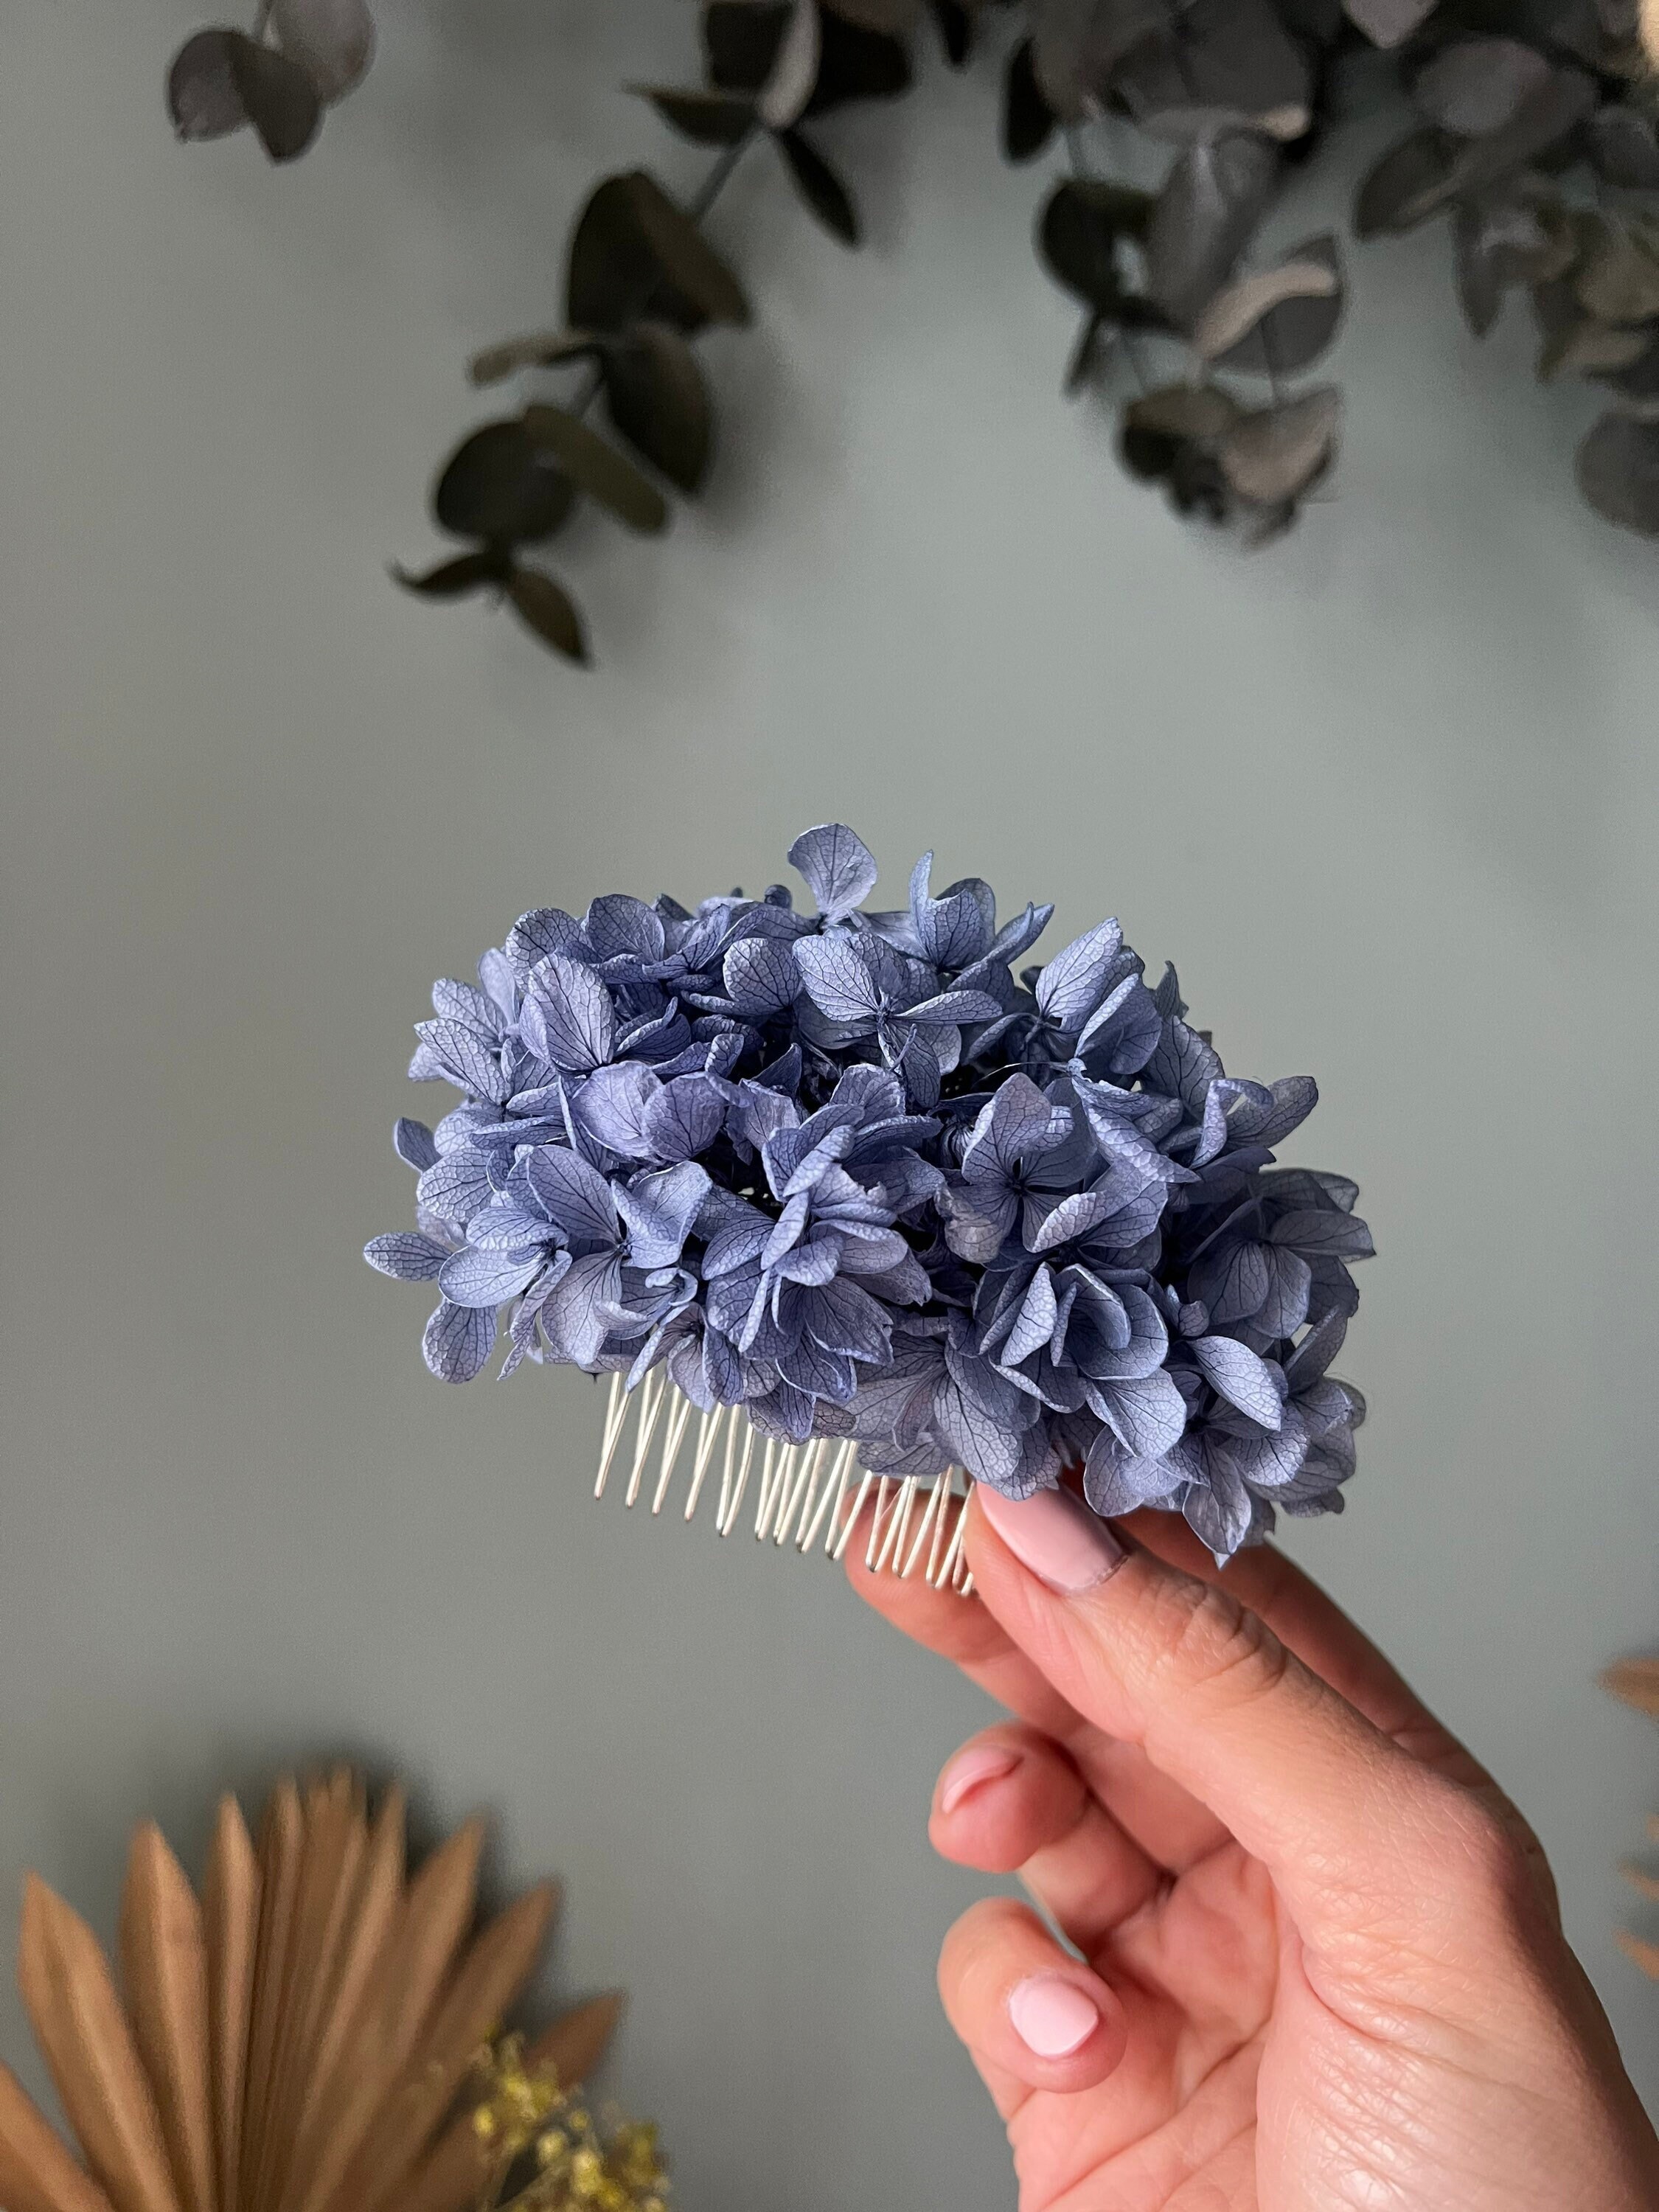 Dried Flowers Comb, Decorative Hair Comb, Wedding Hair Accessory